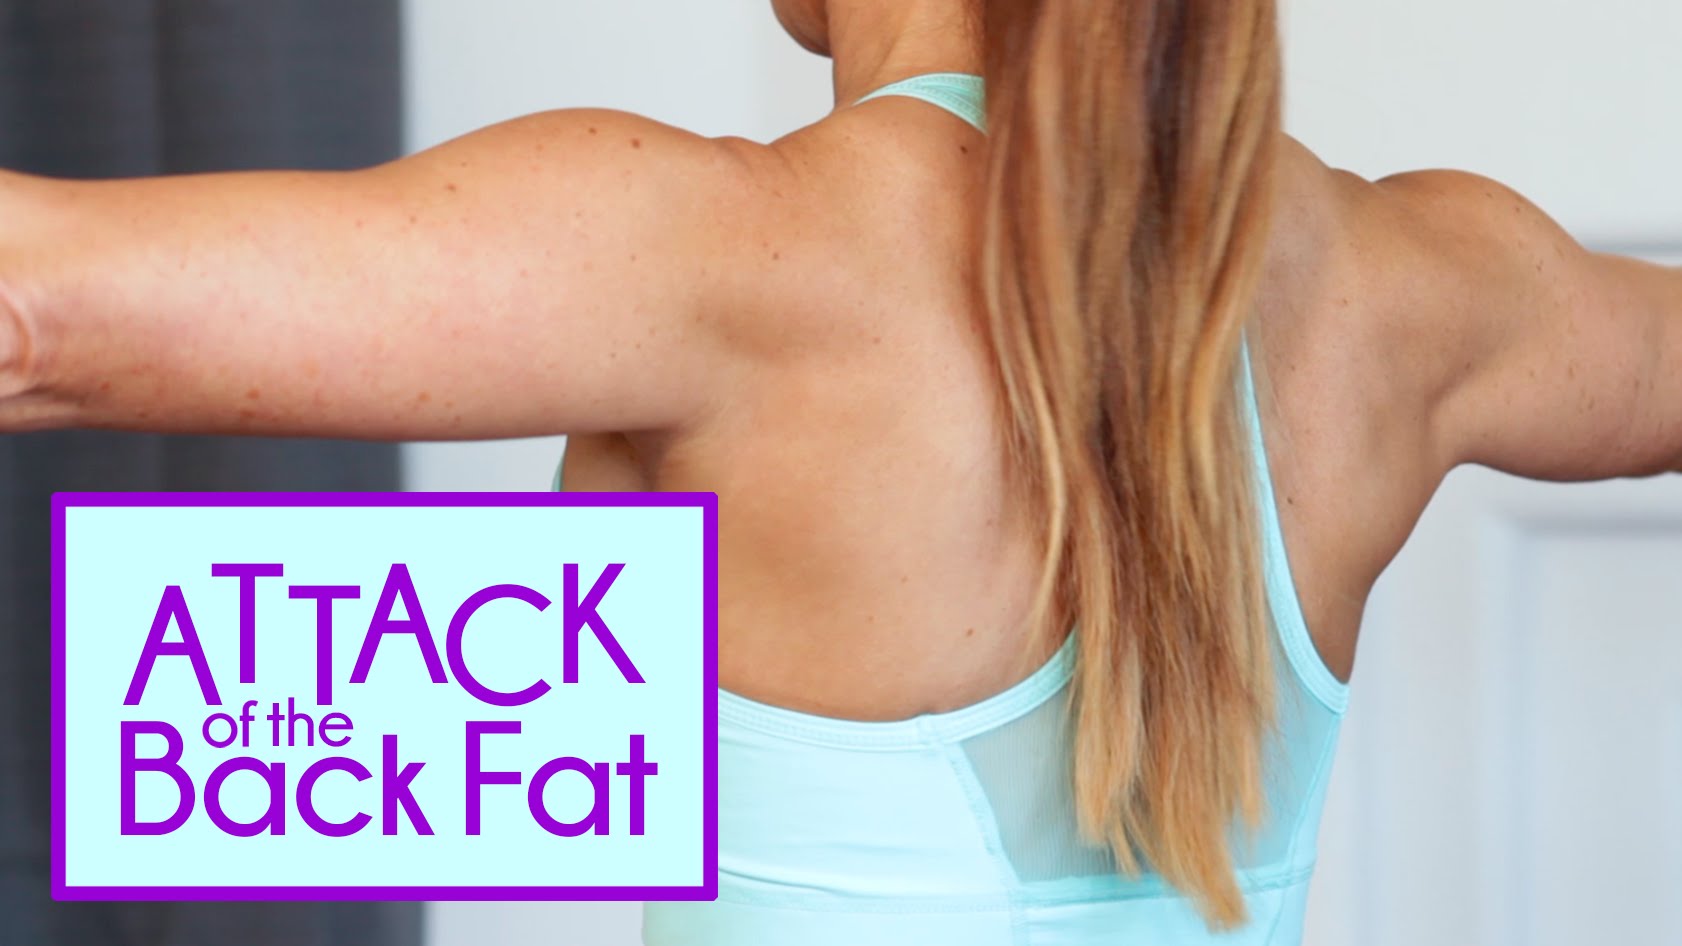 HOW TO GET RID OF UPPER BACK FAT